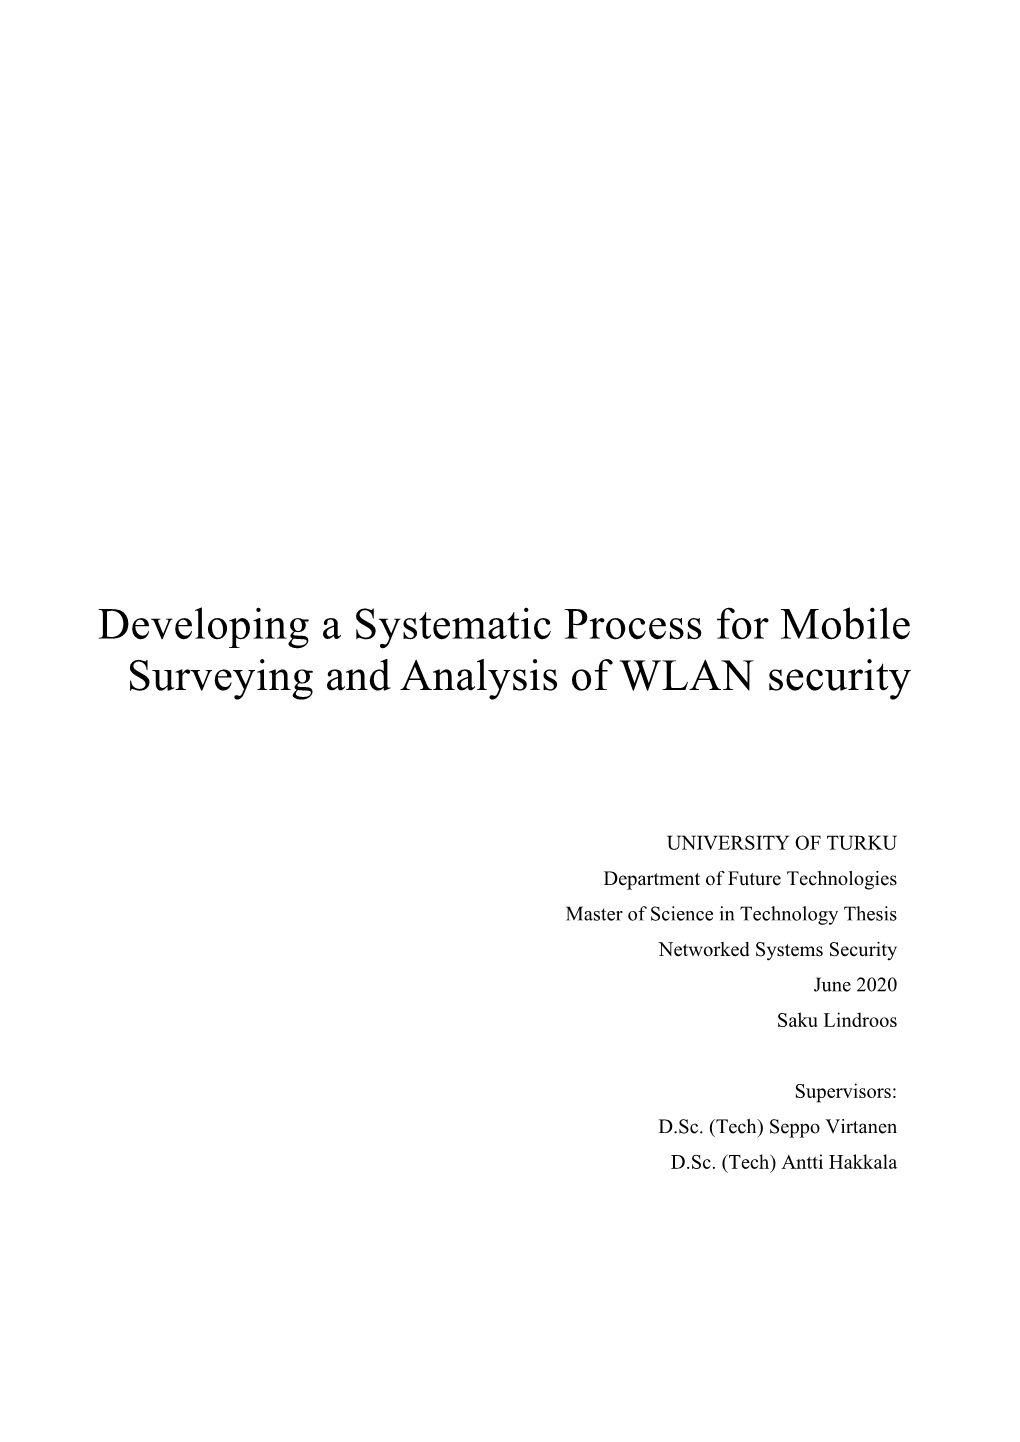 Developing a Systematic Process for Mobile Surveying and Analysis of WLAN Security